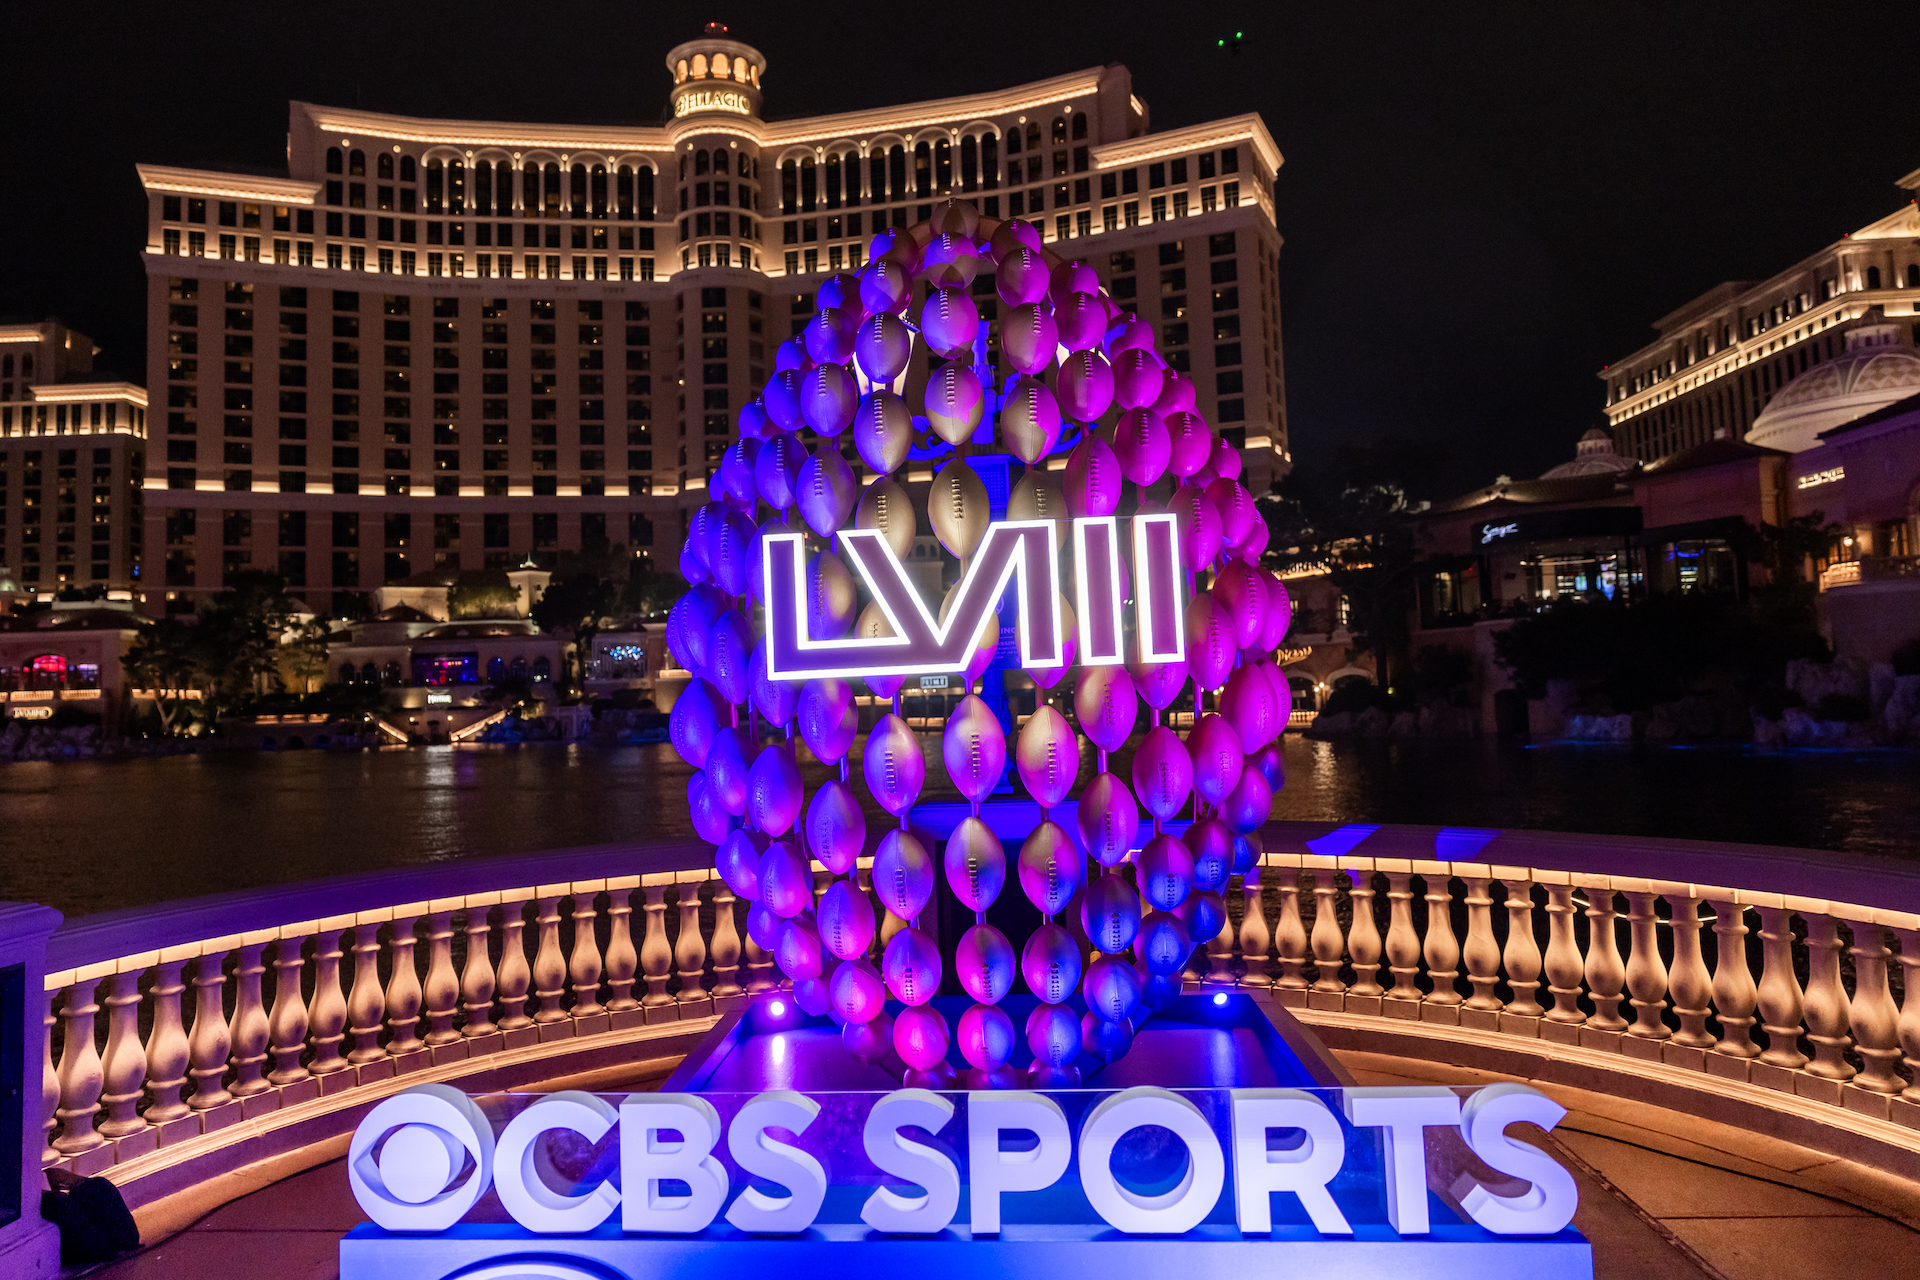 A display for CBS Sports Streaming on Paramount+ is shown in front of the Bellagio Hotel & Casino.